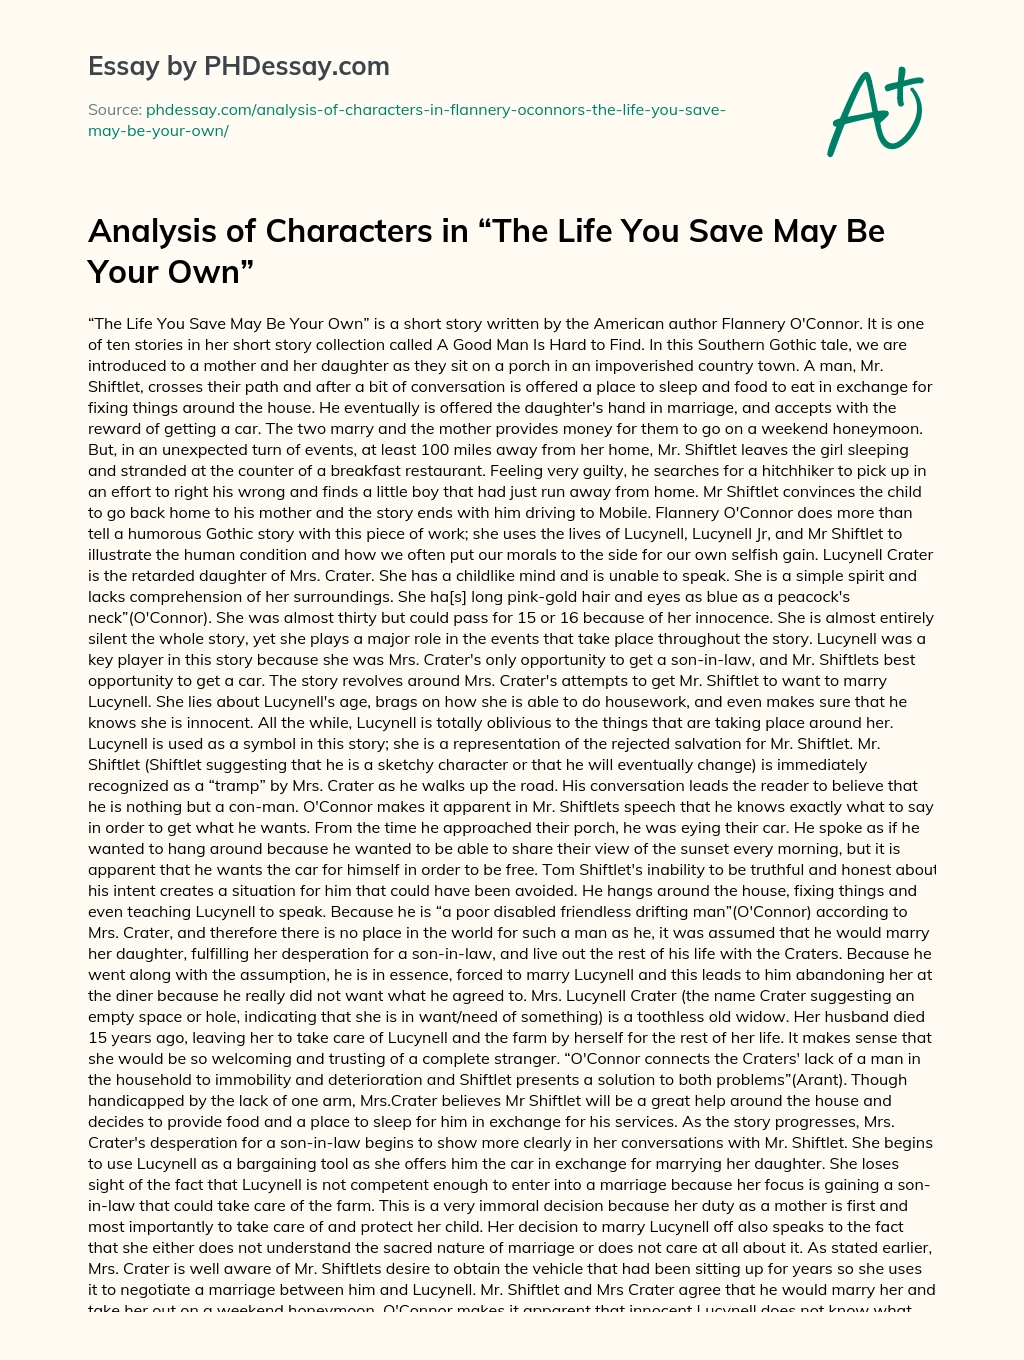 the life you save may be your own characters